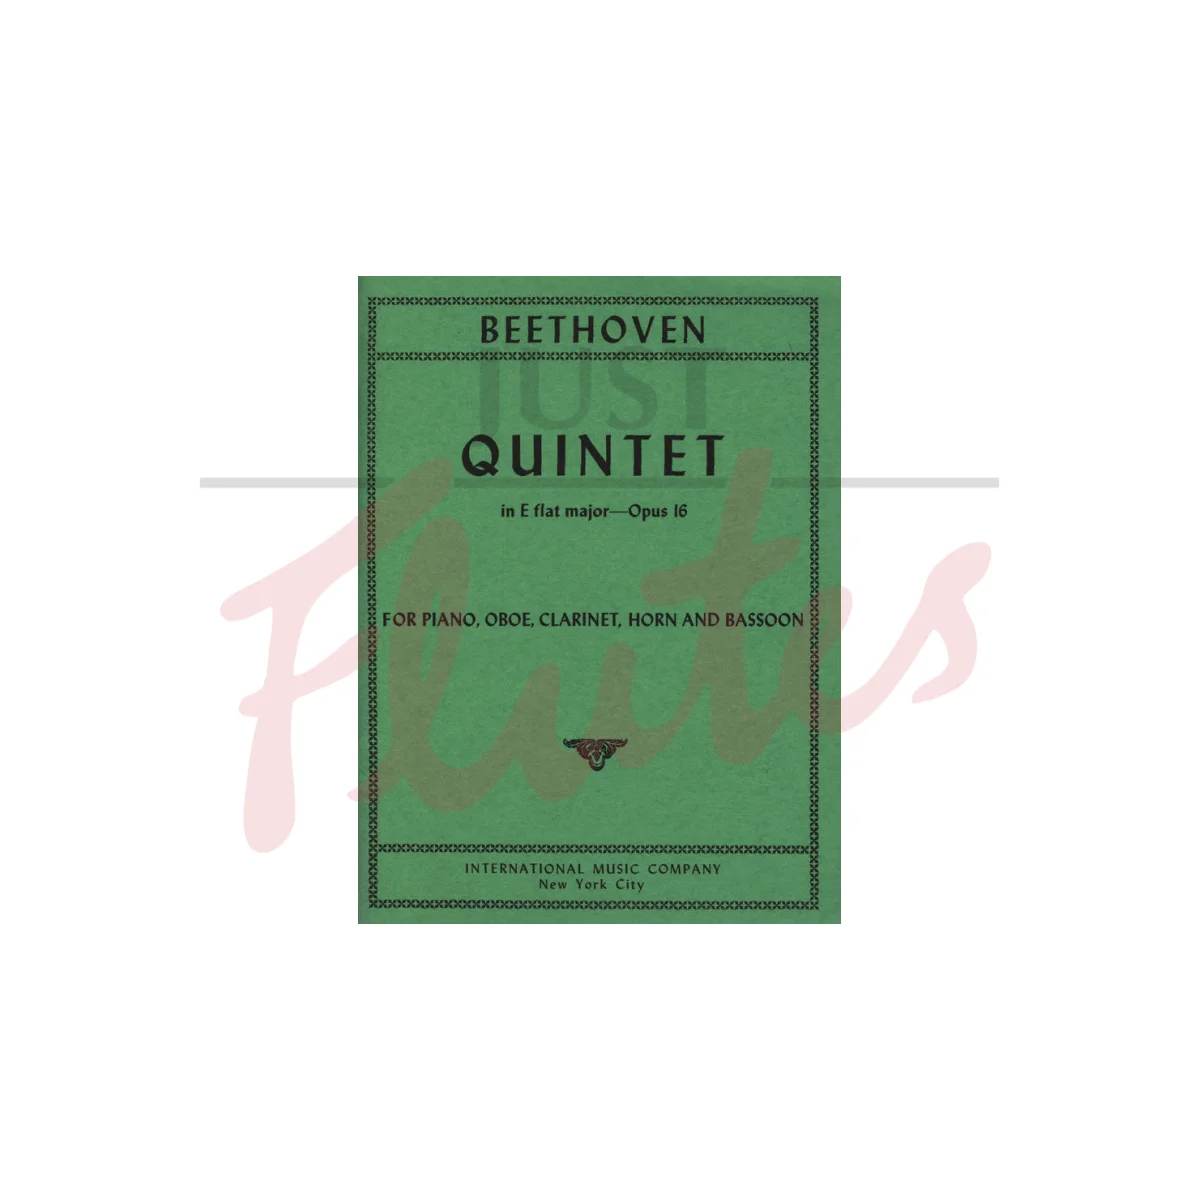 Quintet in Eb major for Oboe, Clarinet, Horn, Bassoon and Piano